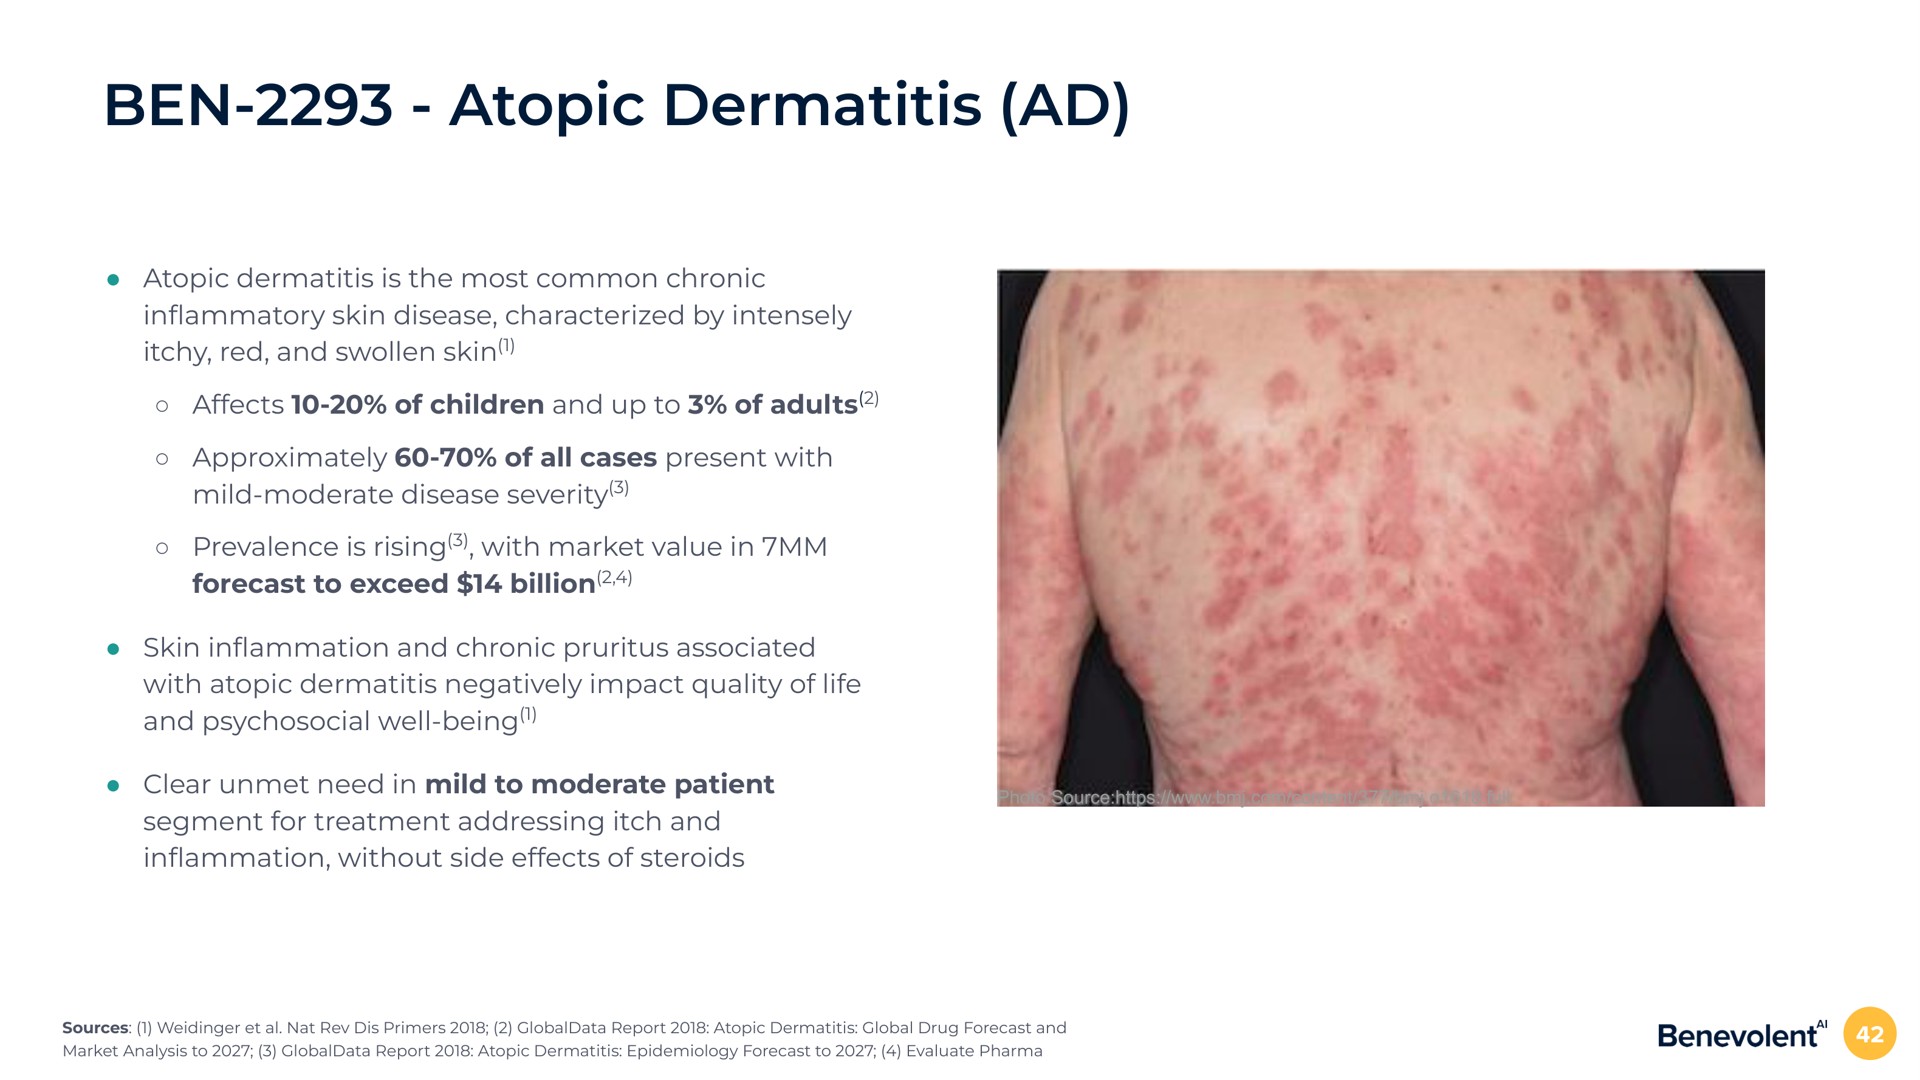 ben atopic dermatitis atopic dermatitis is the most common chronic in skin disease characterized by intensely itchy red and swollen skin affects of children and up to of adults approximately of all cases present with mild moderate disease severity prevalence is rising with market value in forecast to exceed billion skin in and chronic pruritus associated with atopic dermatitis negatively impact quality of life and psychosocial well being clear unmet need in mild to moderate patient segment for treatment addressing itch and in without side effects of steroids | BenevolentAI